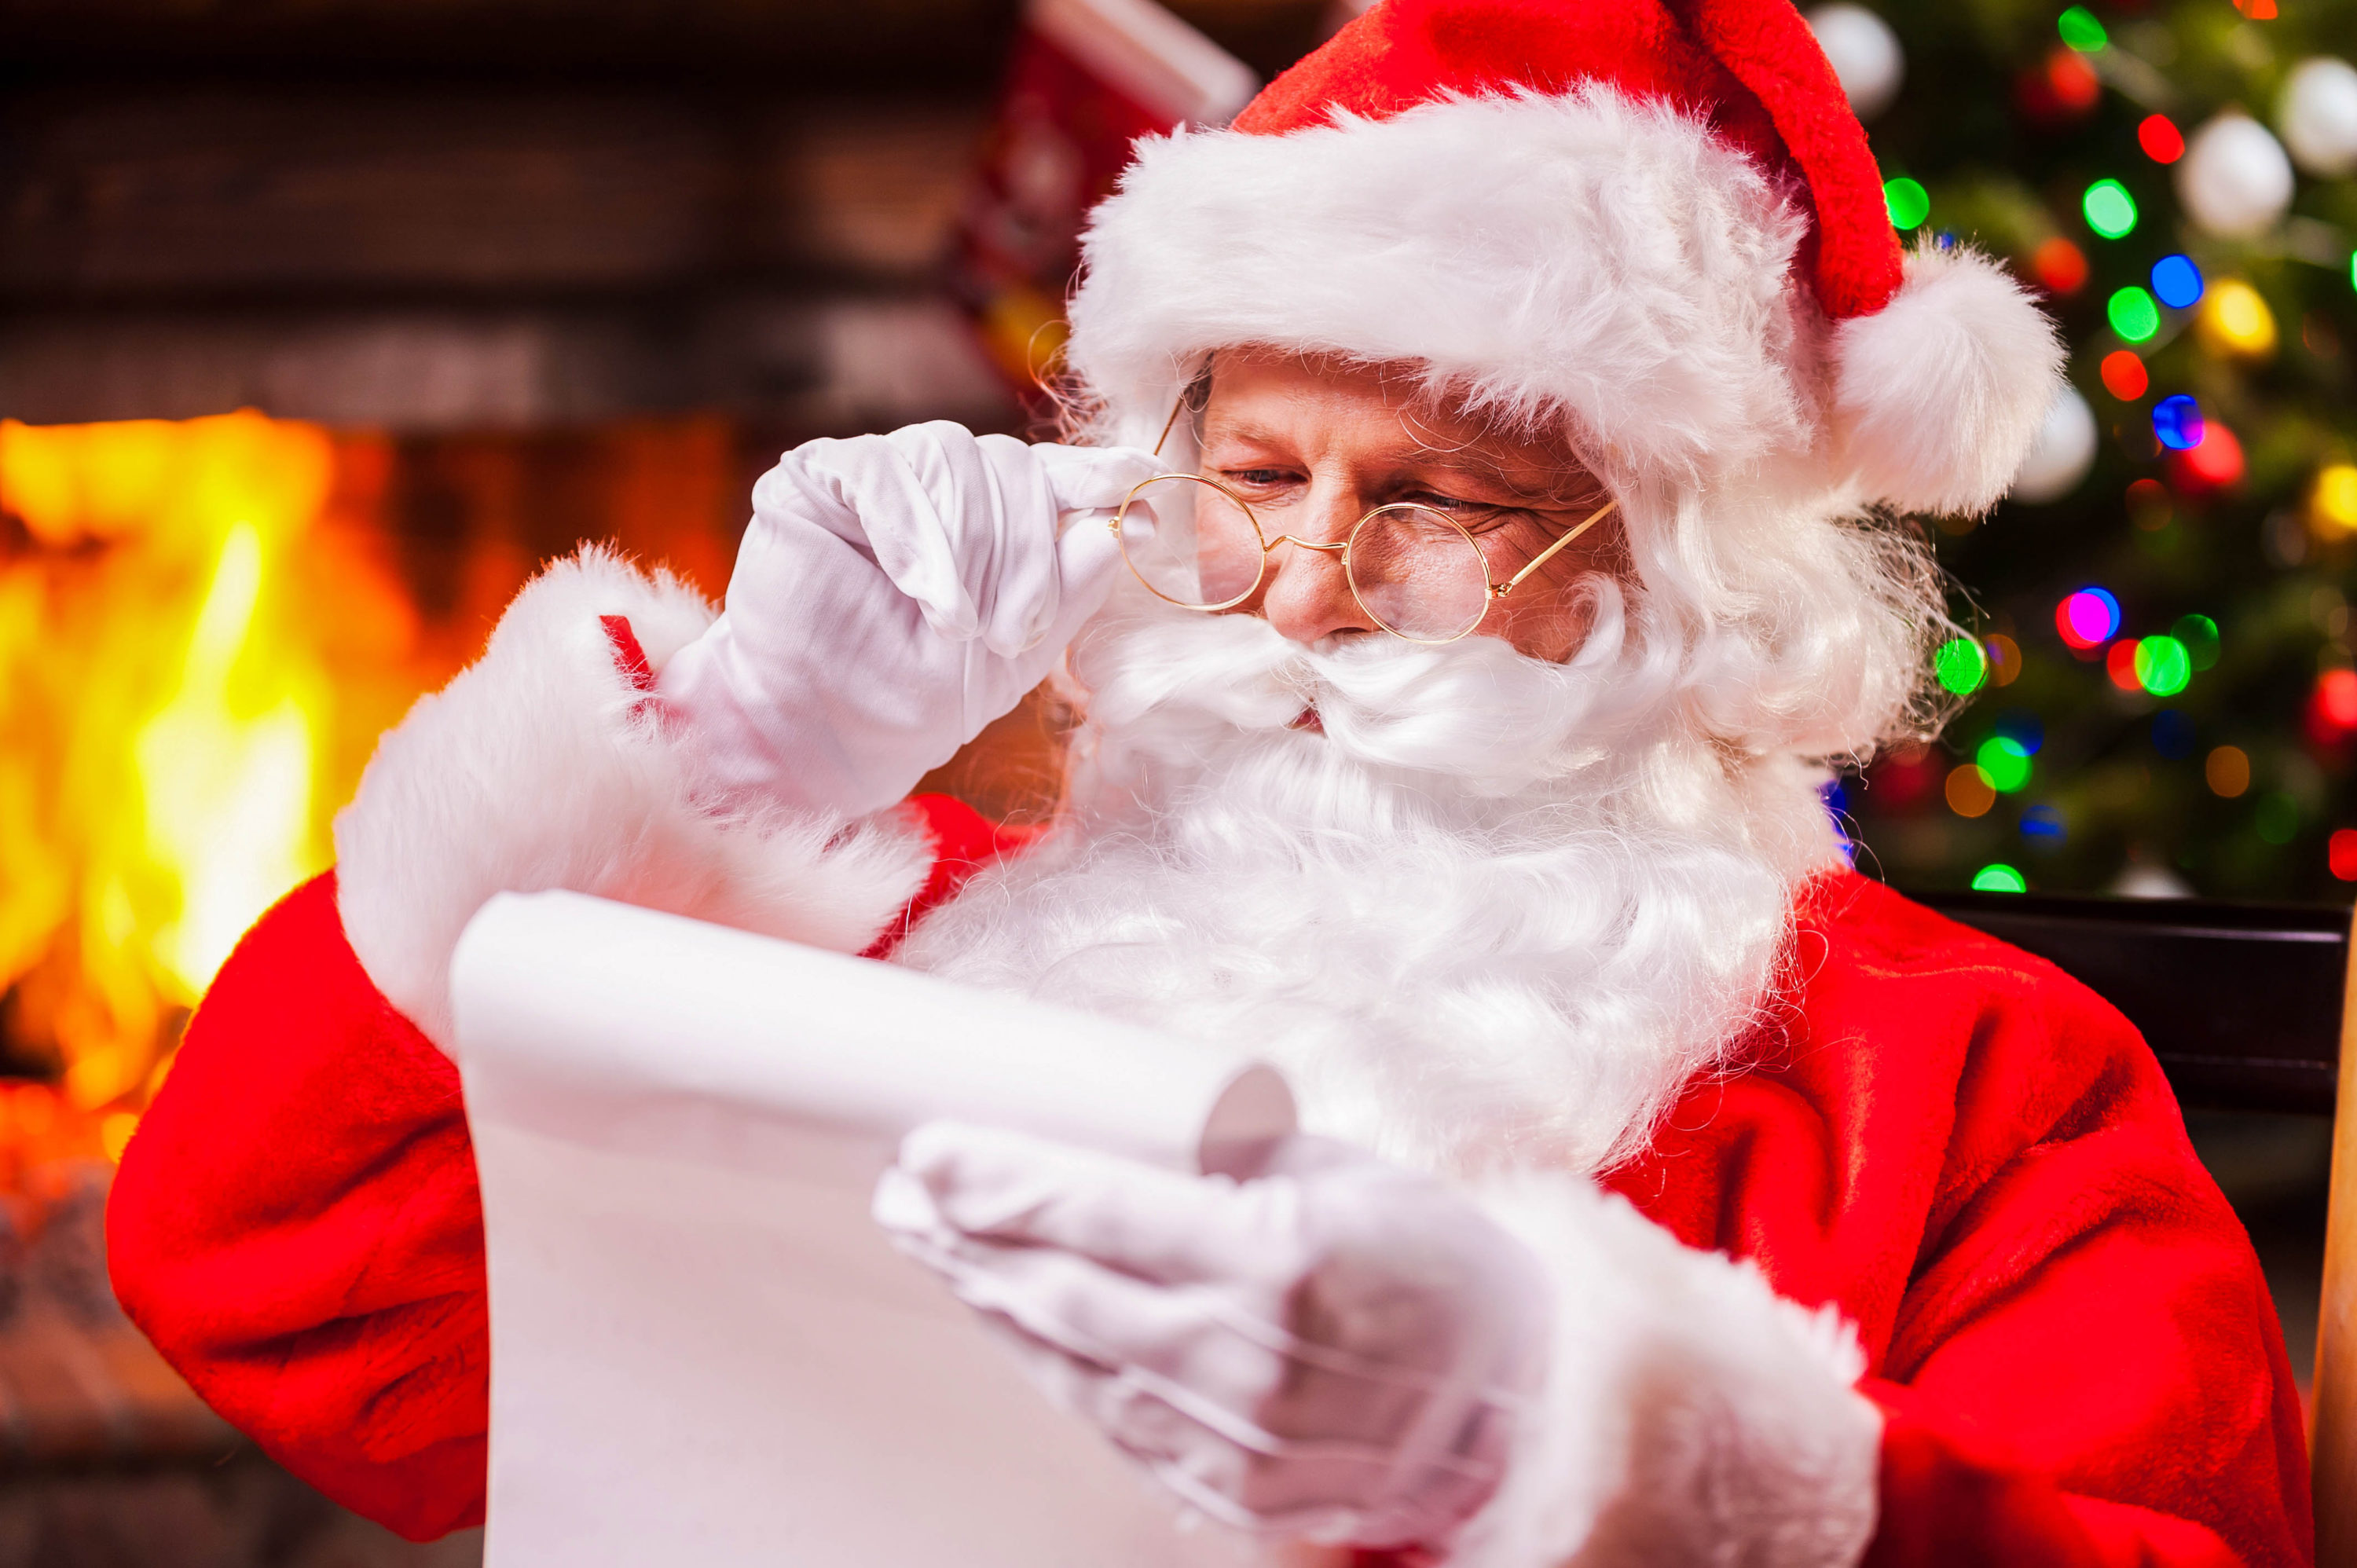 Santa's List Day - He's checking his list, he's checking it twice. He's gonna find out who's been naught or nice.